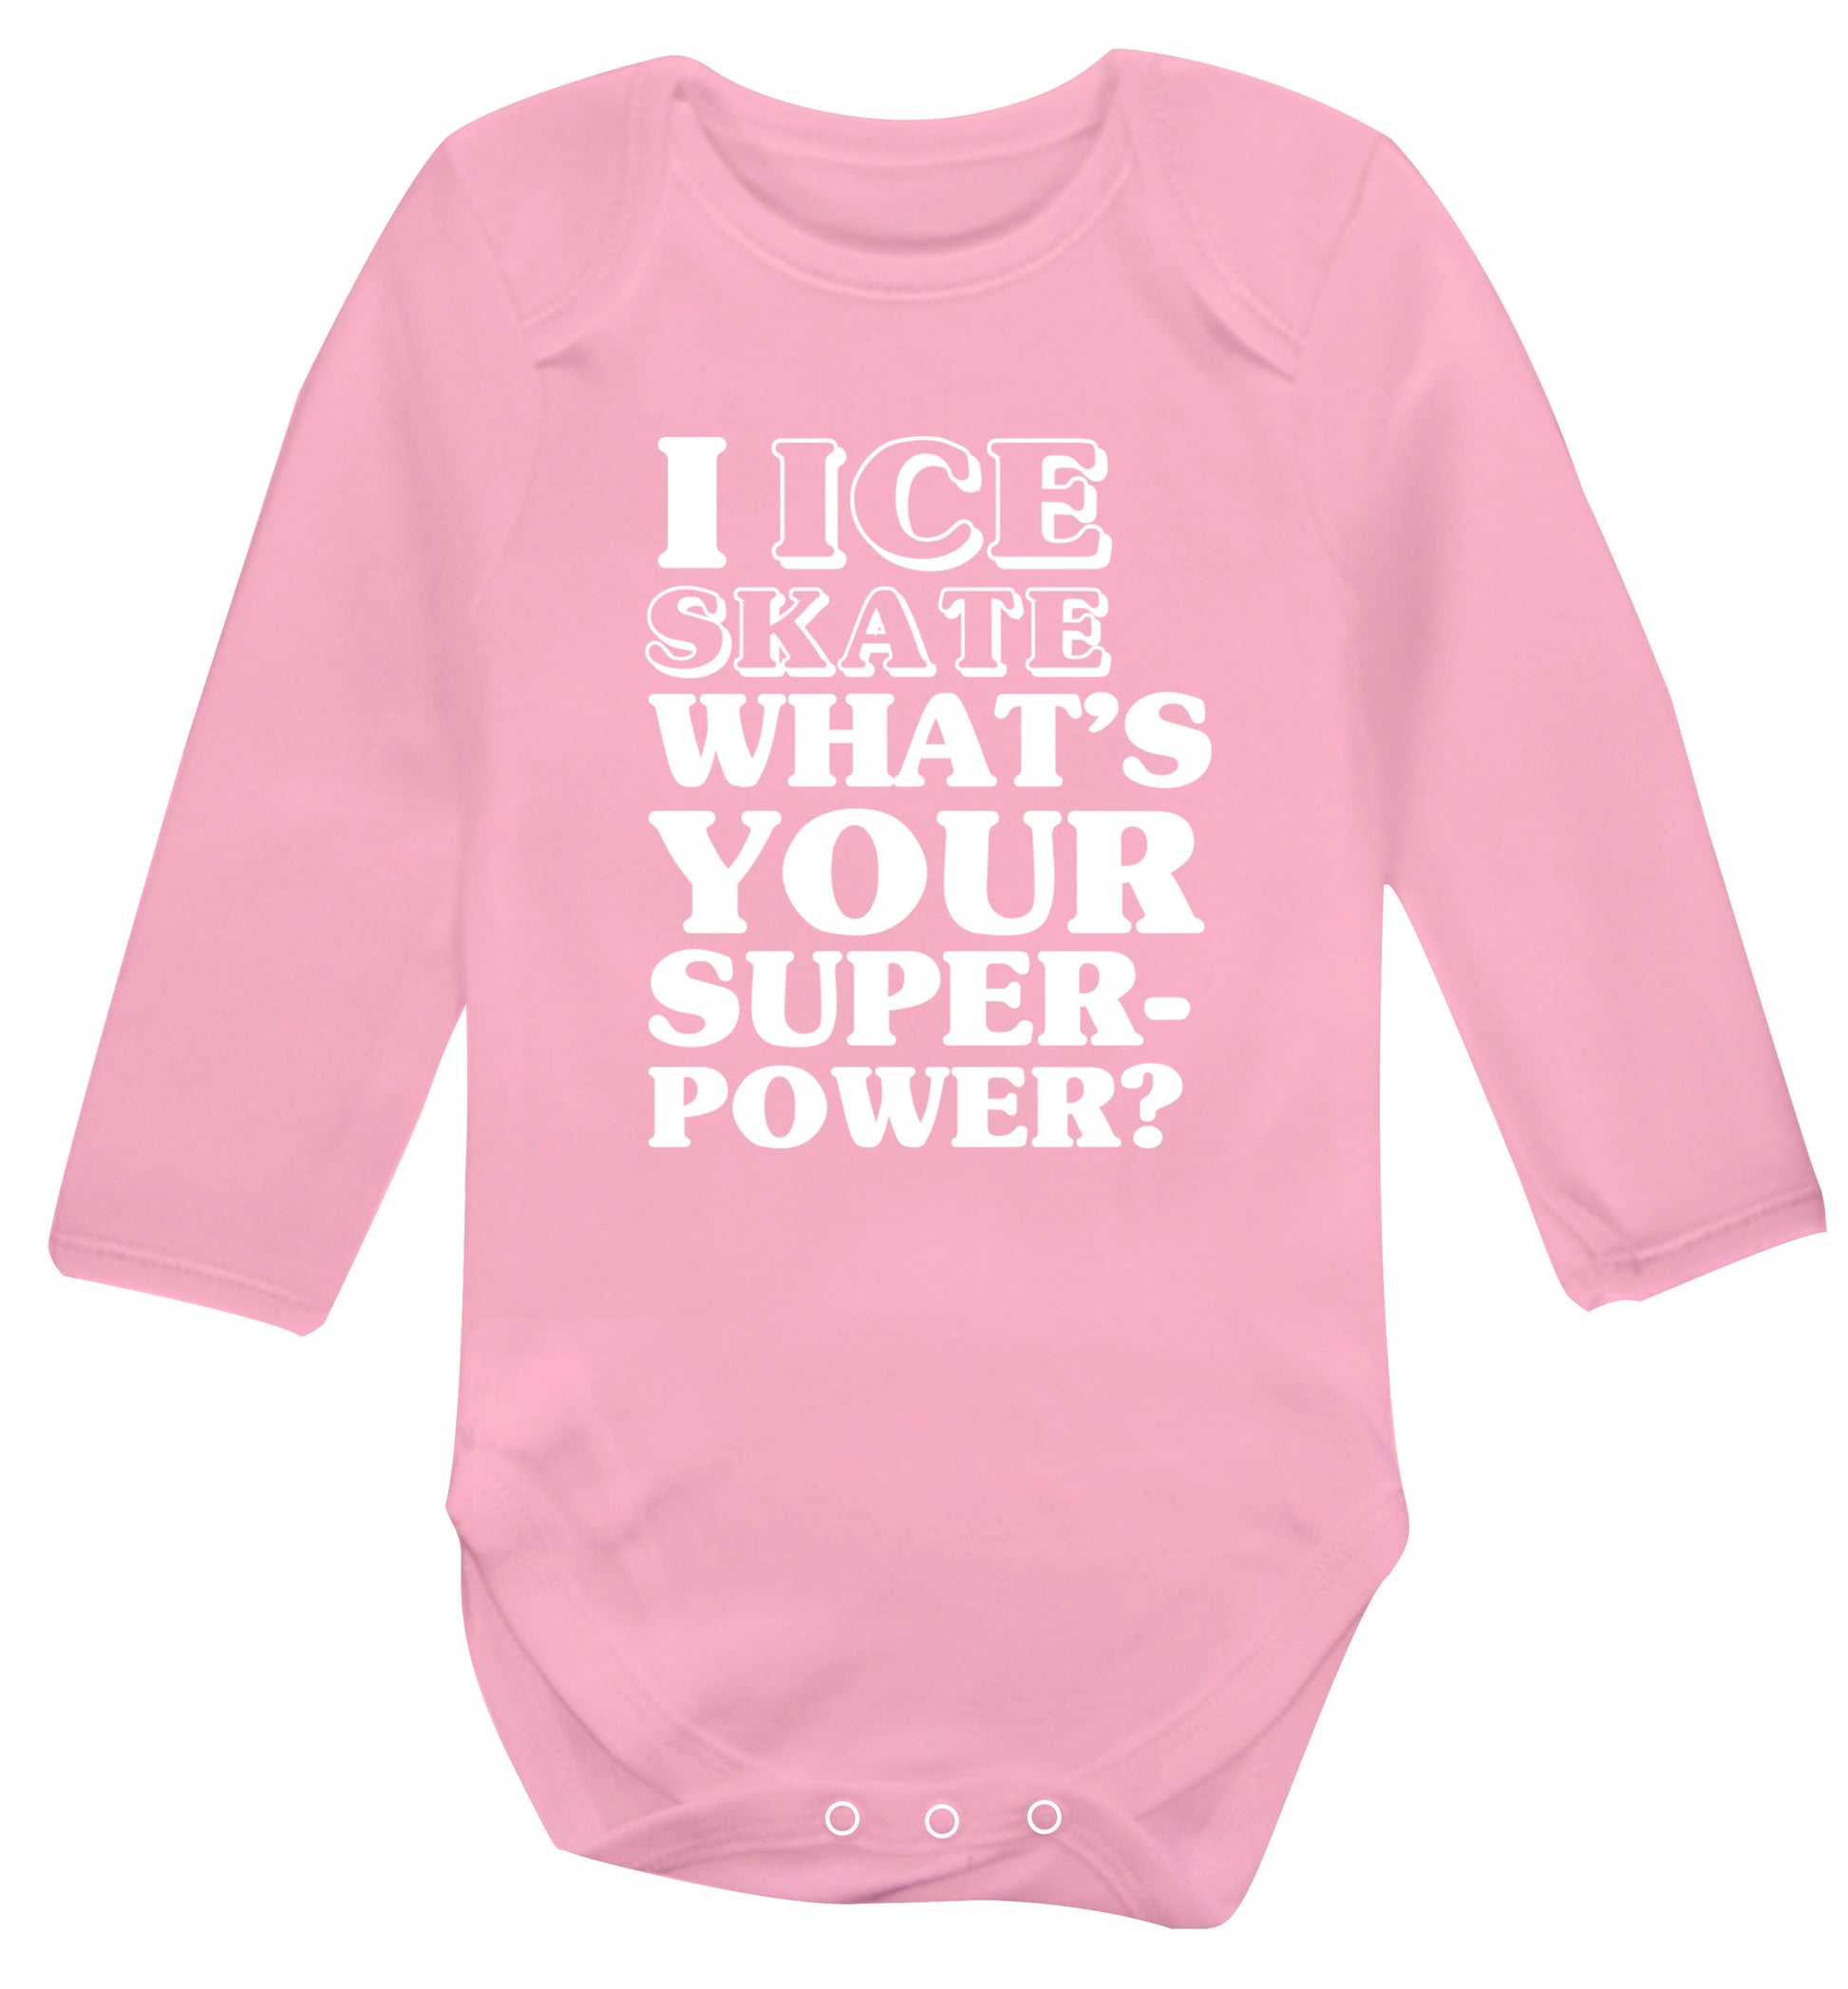 I ice skate what's your superpower? Baby Vest long sleeved pale pink 6-12 months